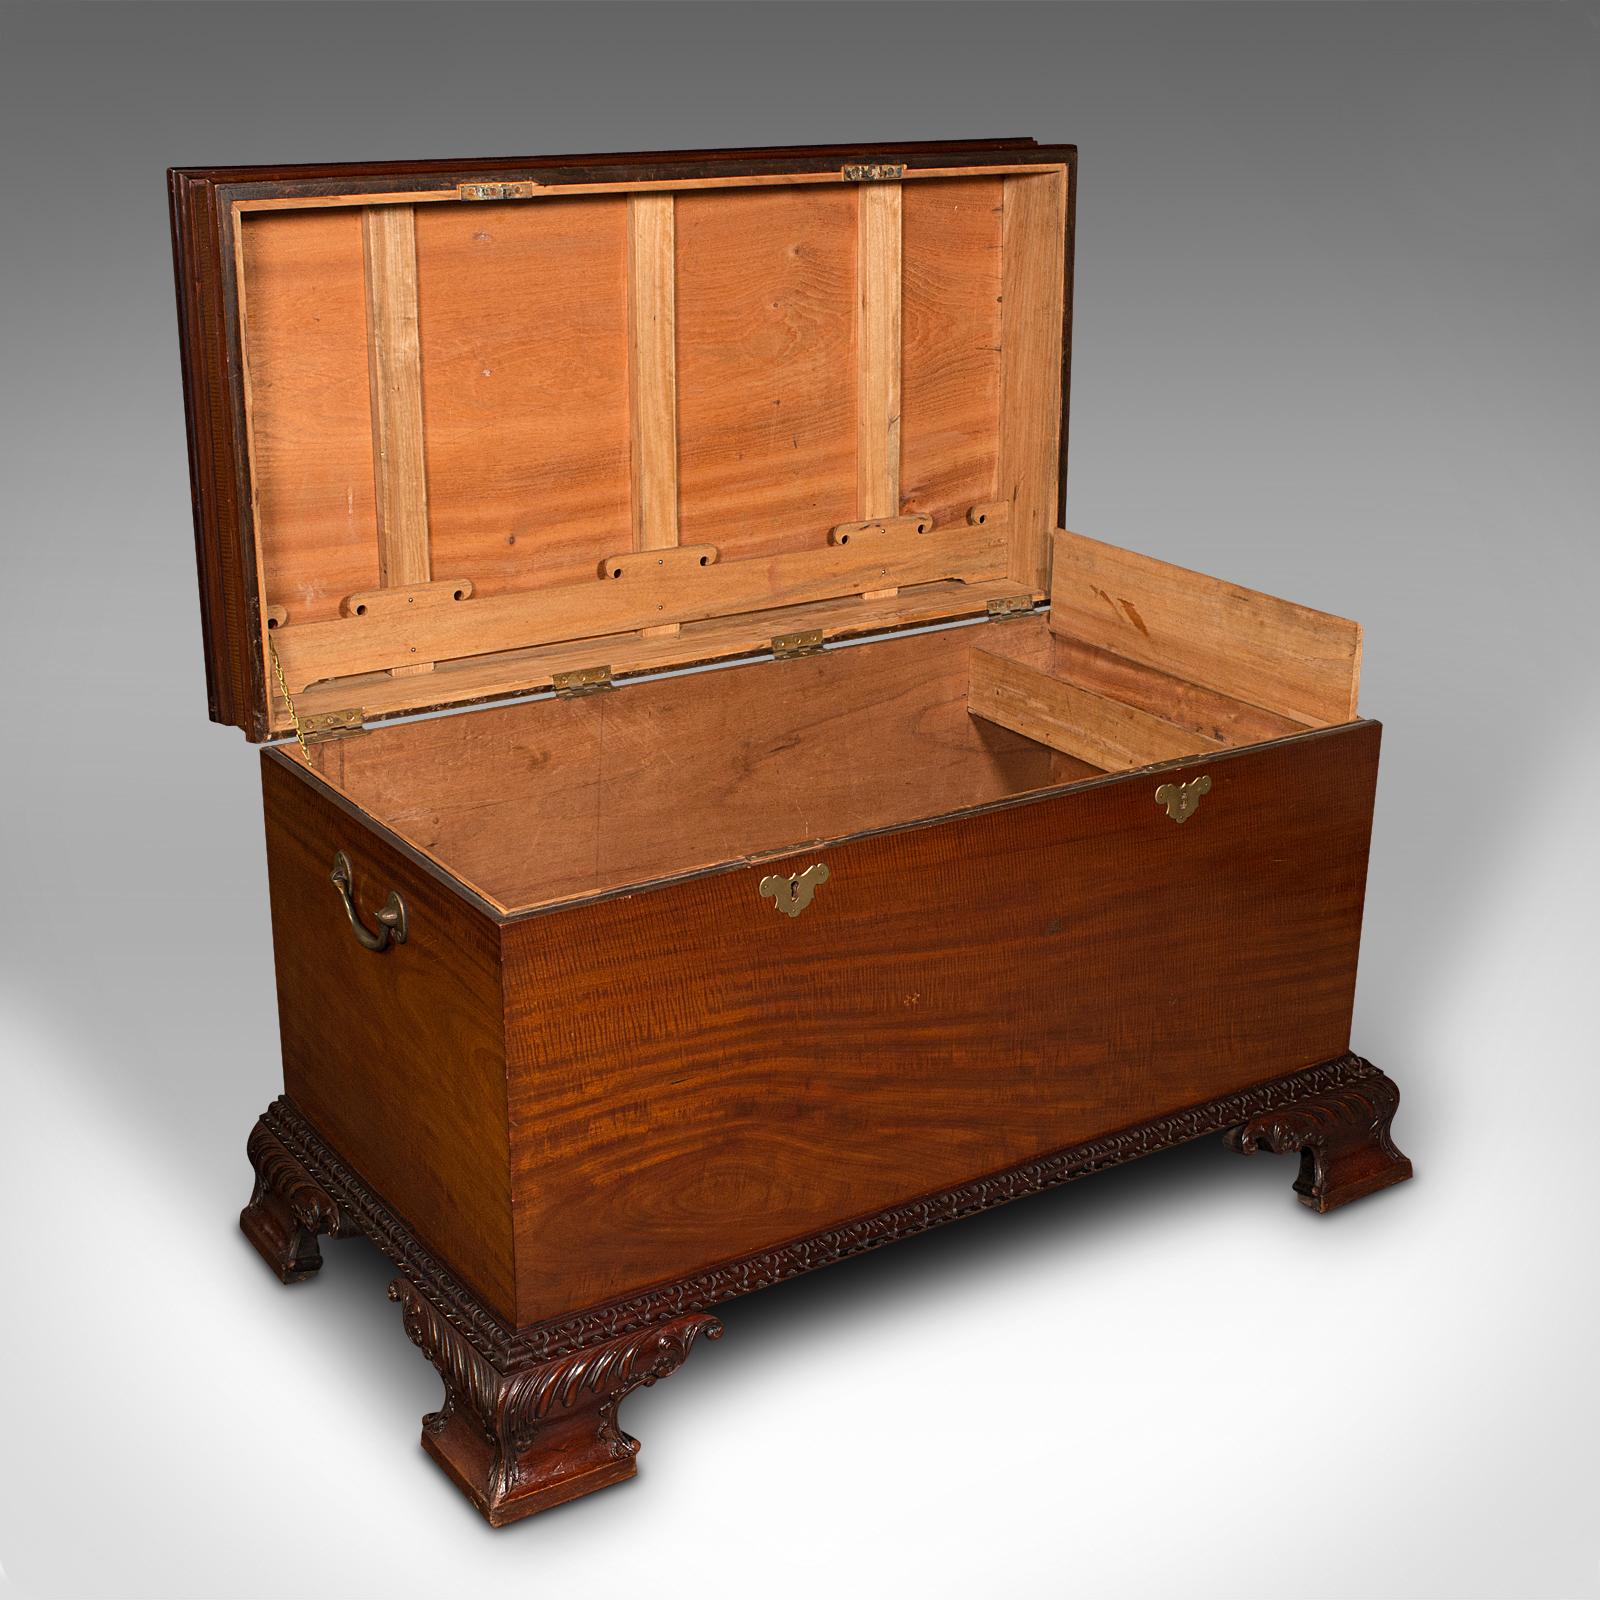 This is a large vintage camphor trunk. A Japanese, mahogany and camphorwood lined chest, dating to the Art Deco period, circa 1930.

Exceptional craftsmanship and figuring accentuates this generous coffer
Displaying a desirable aged patina and in